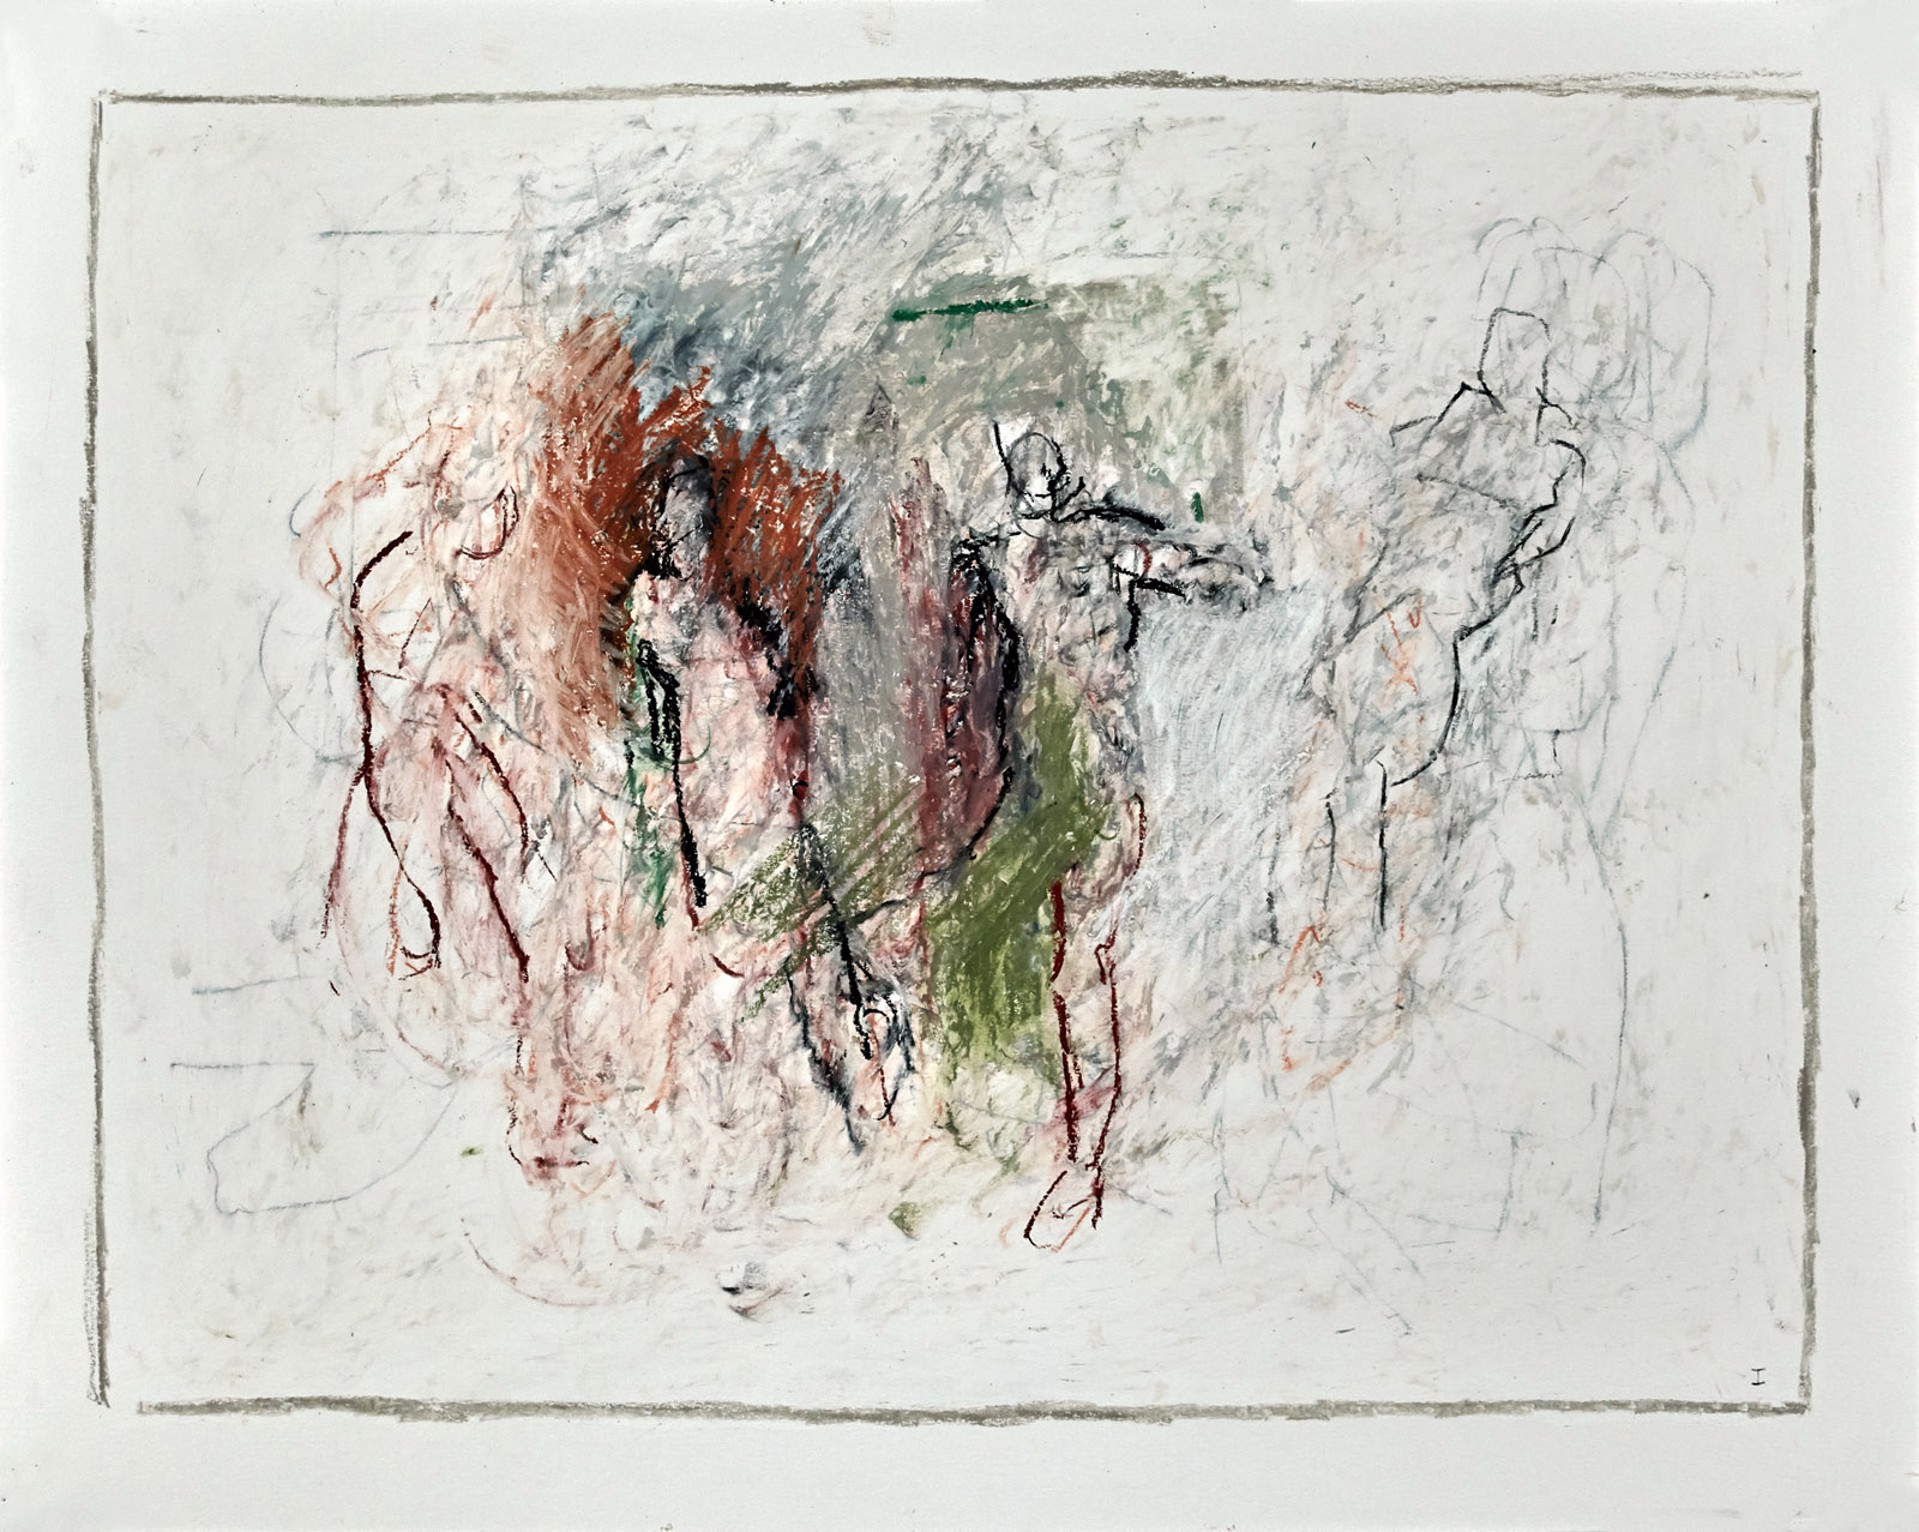 Drawings from Mt Gretna: Confrontation by Thaddeus Radell